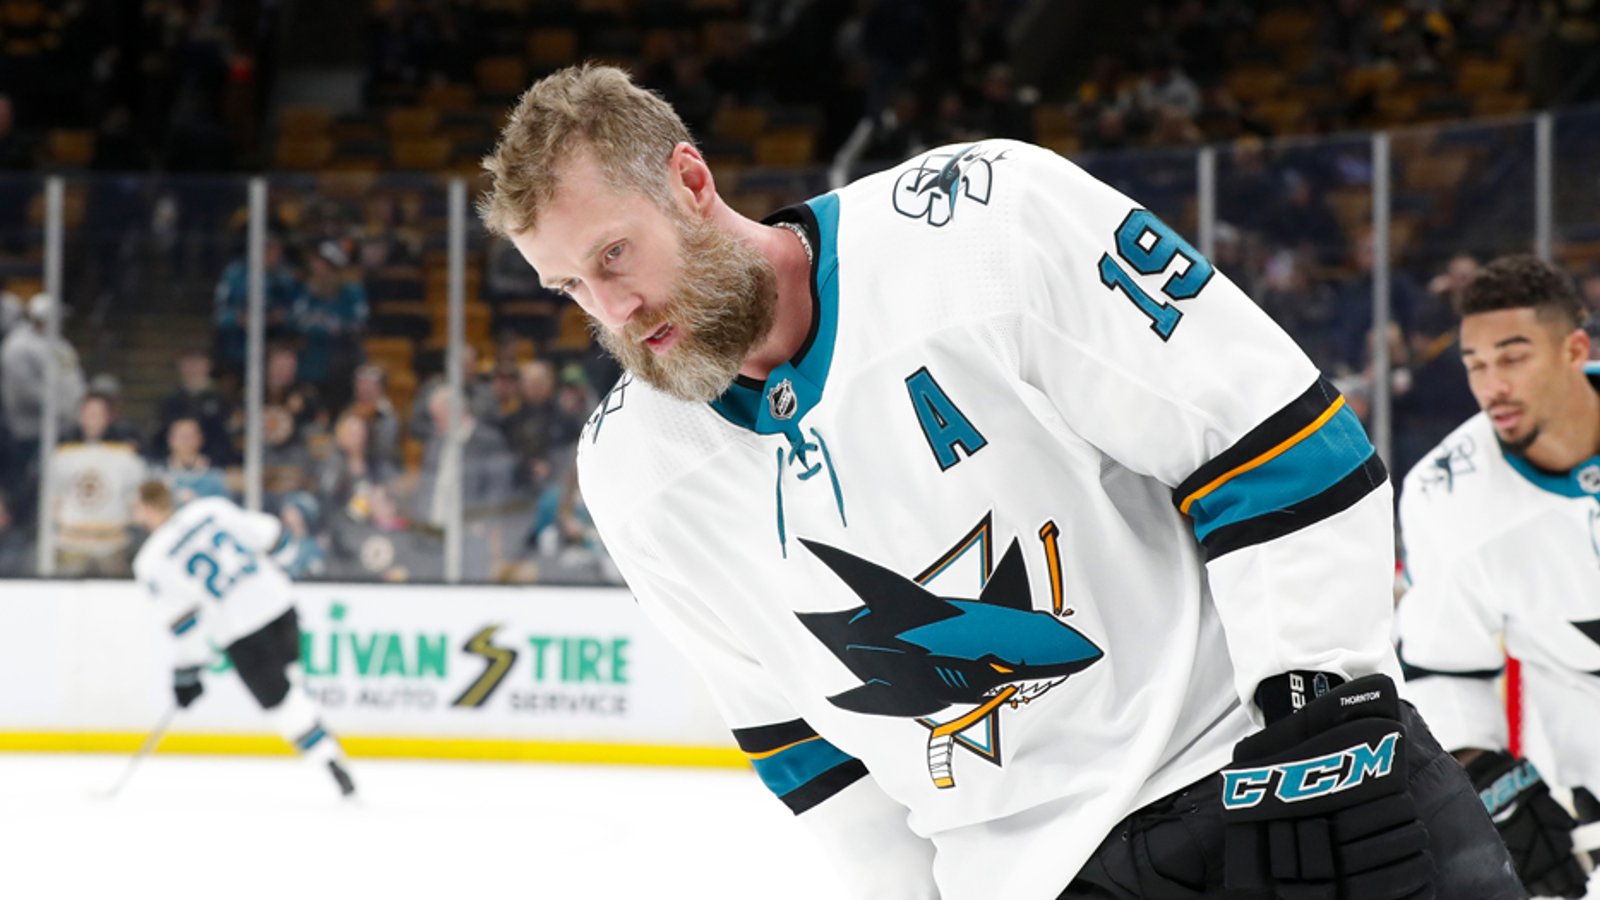 Report: Thornton wanted to be traded, Wilson wouldn’t pull the trigger